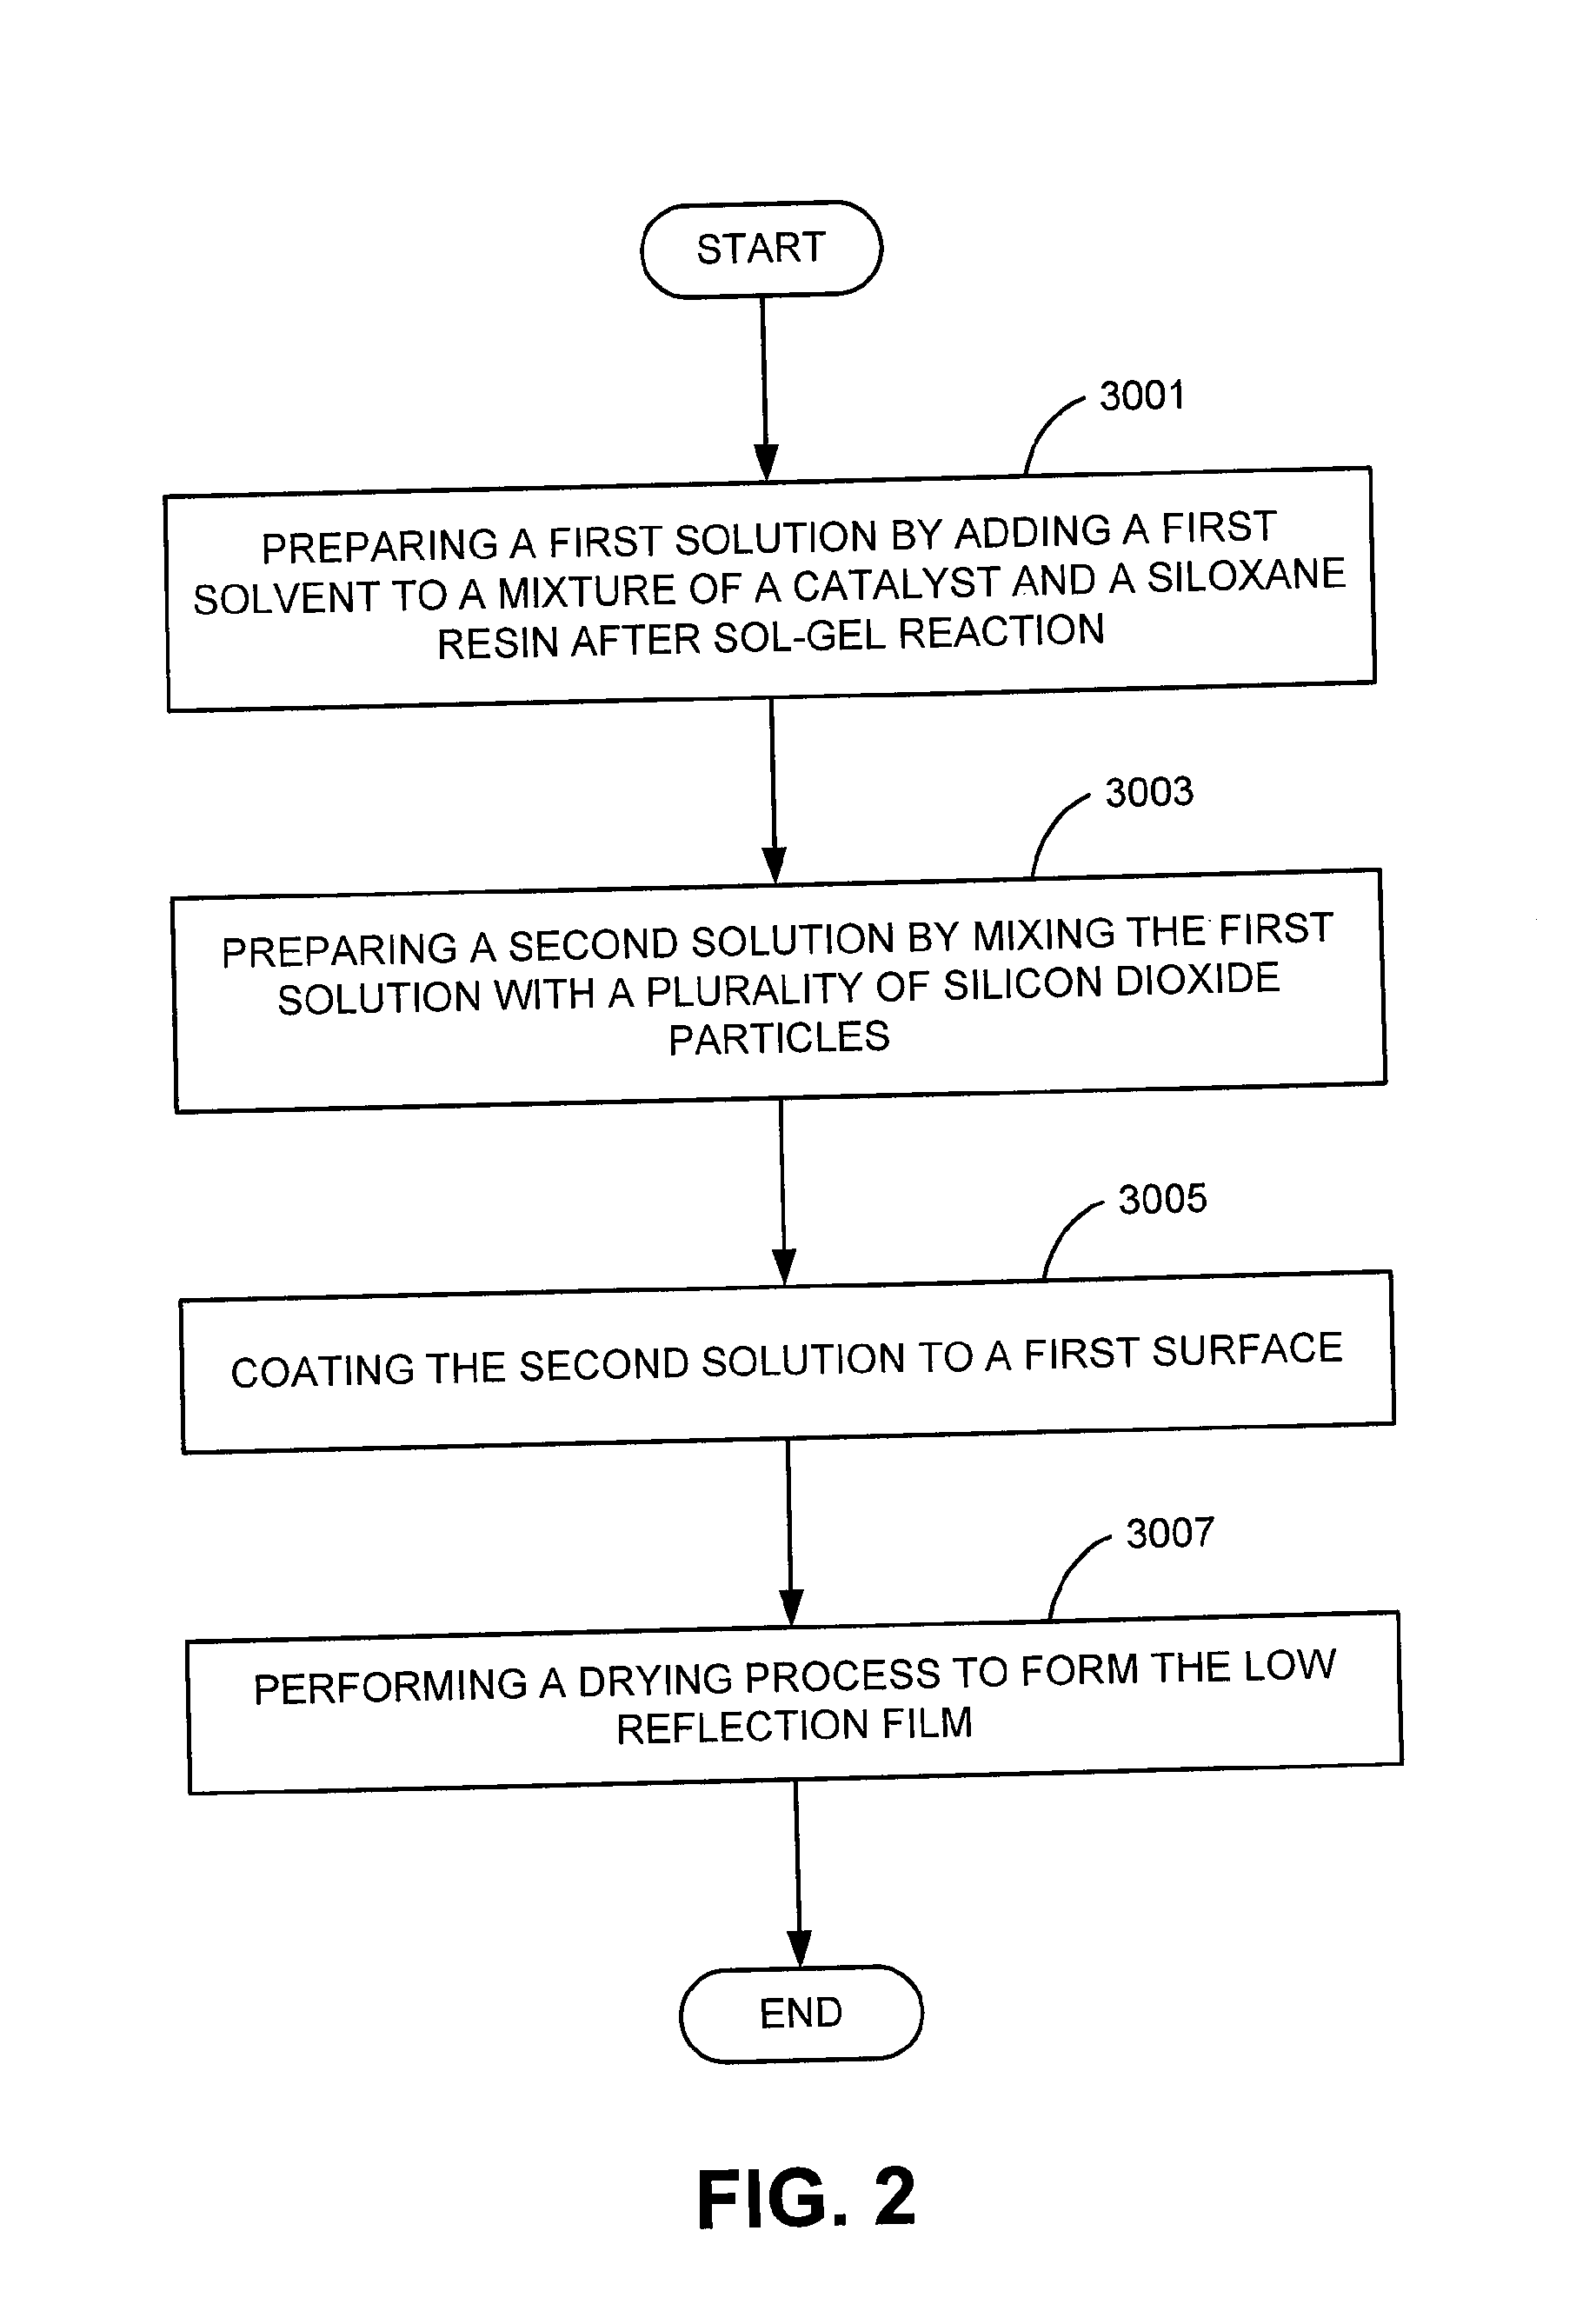 Low Reflection Film and Forming Method